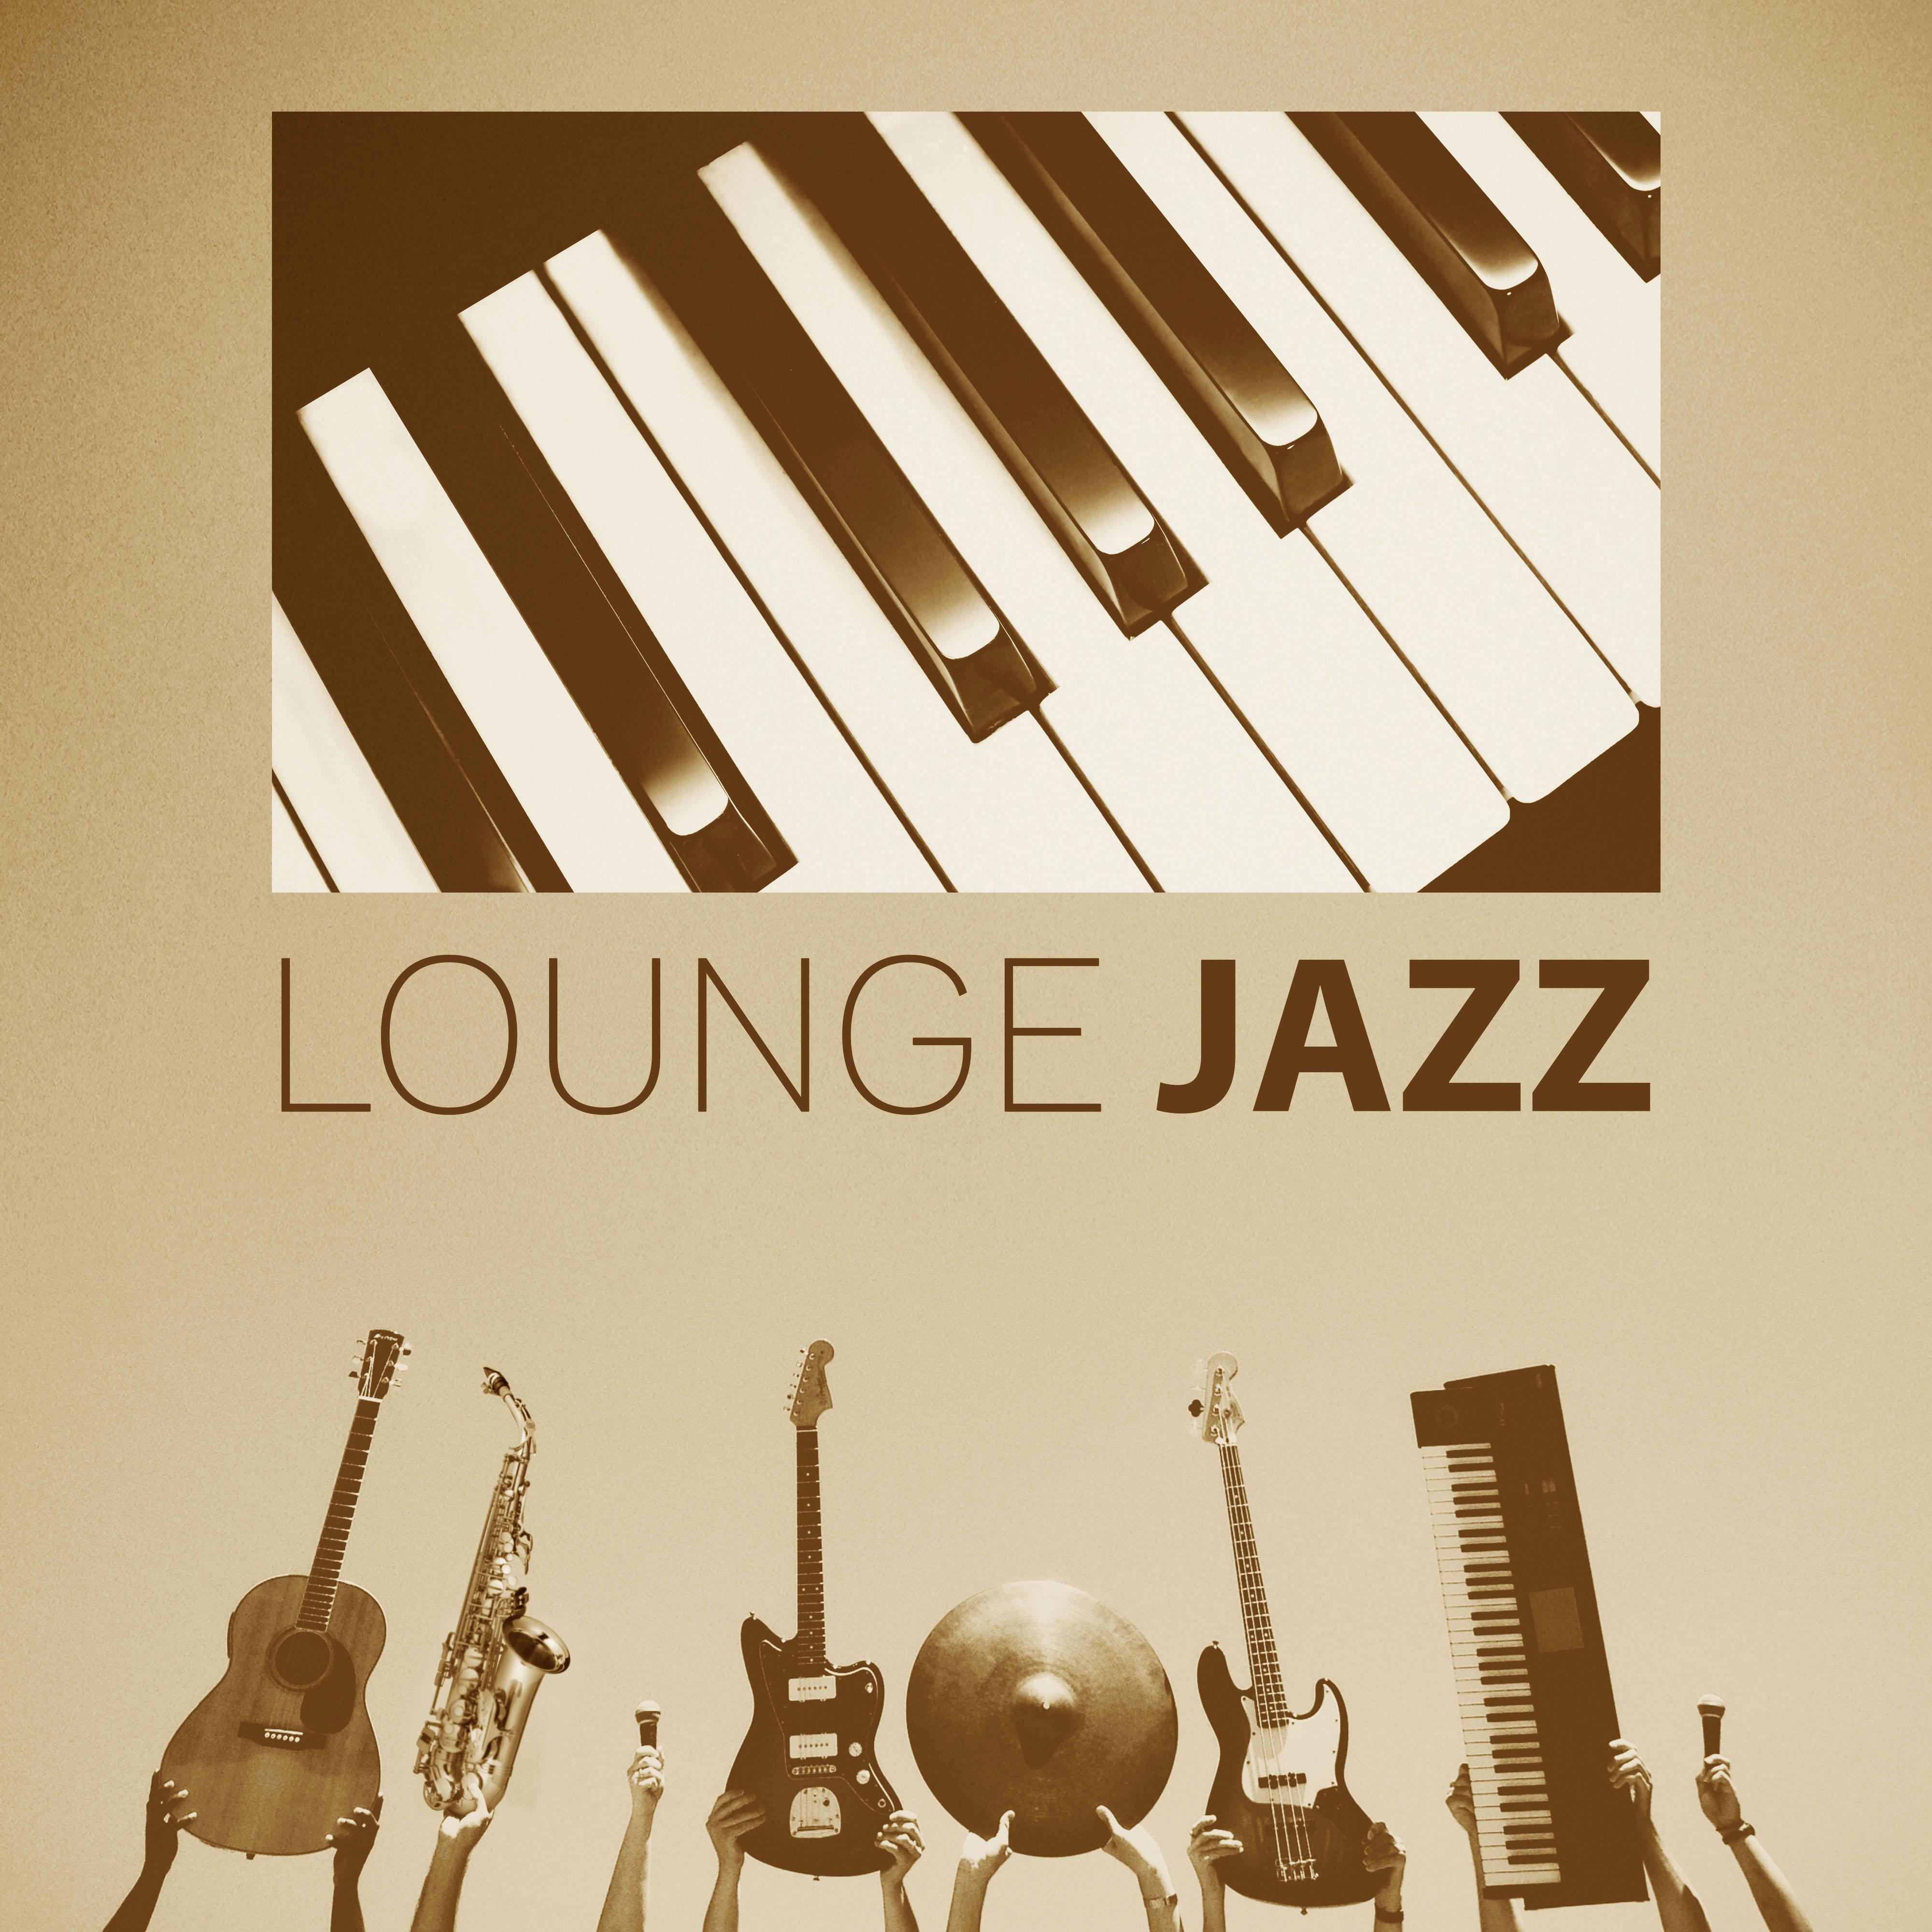 Lounge Jazz - The Simple Jazz, Mood Music, Music for Relaxation, Jazz with Candles